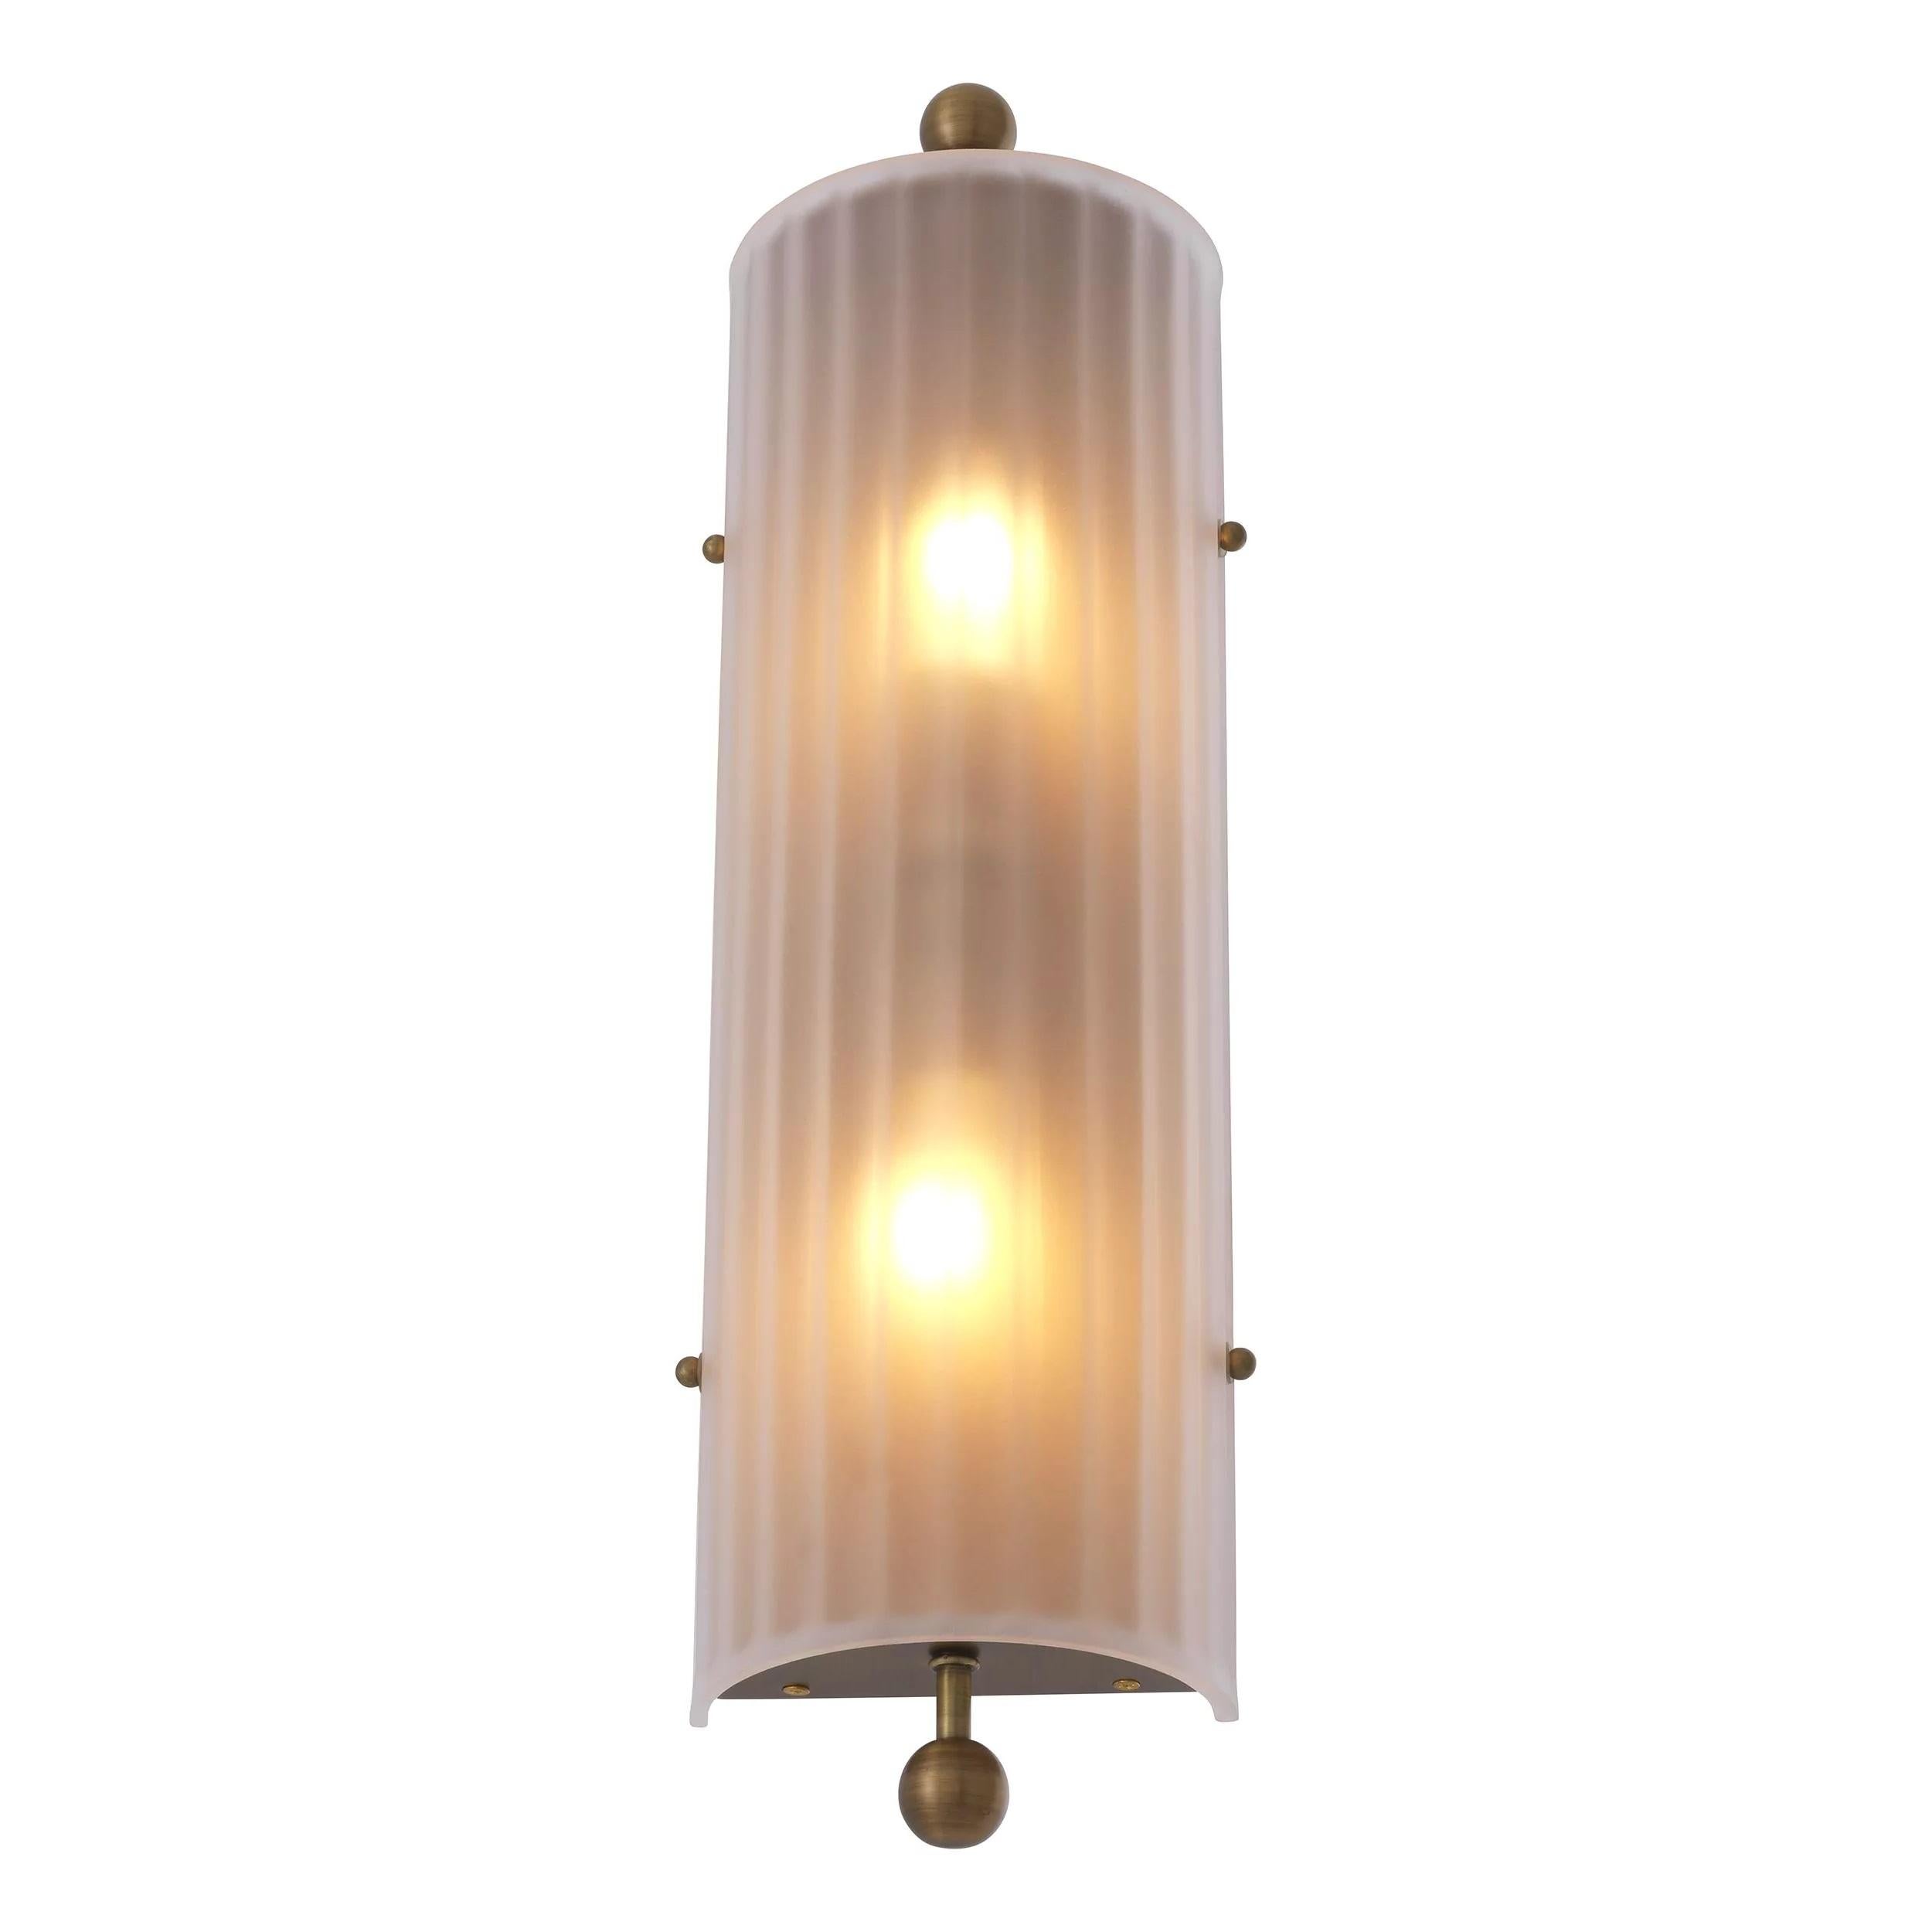 Contemporary Art Deco Style Brass and Textured Glass Curved Wall Light